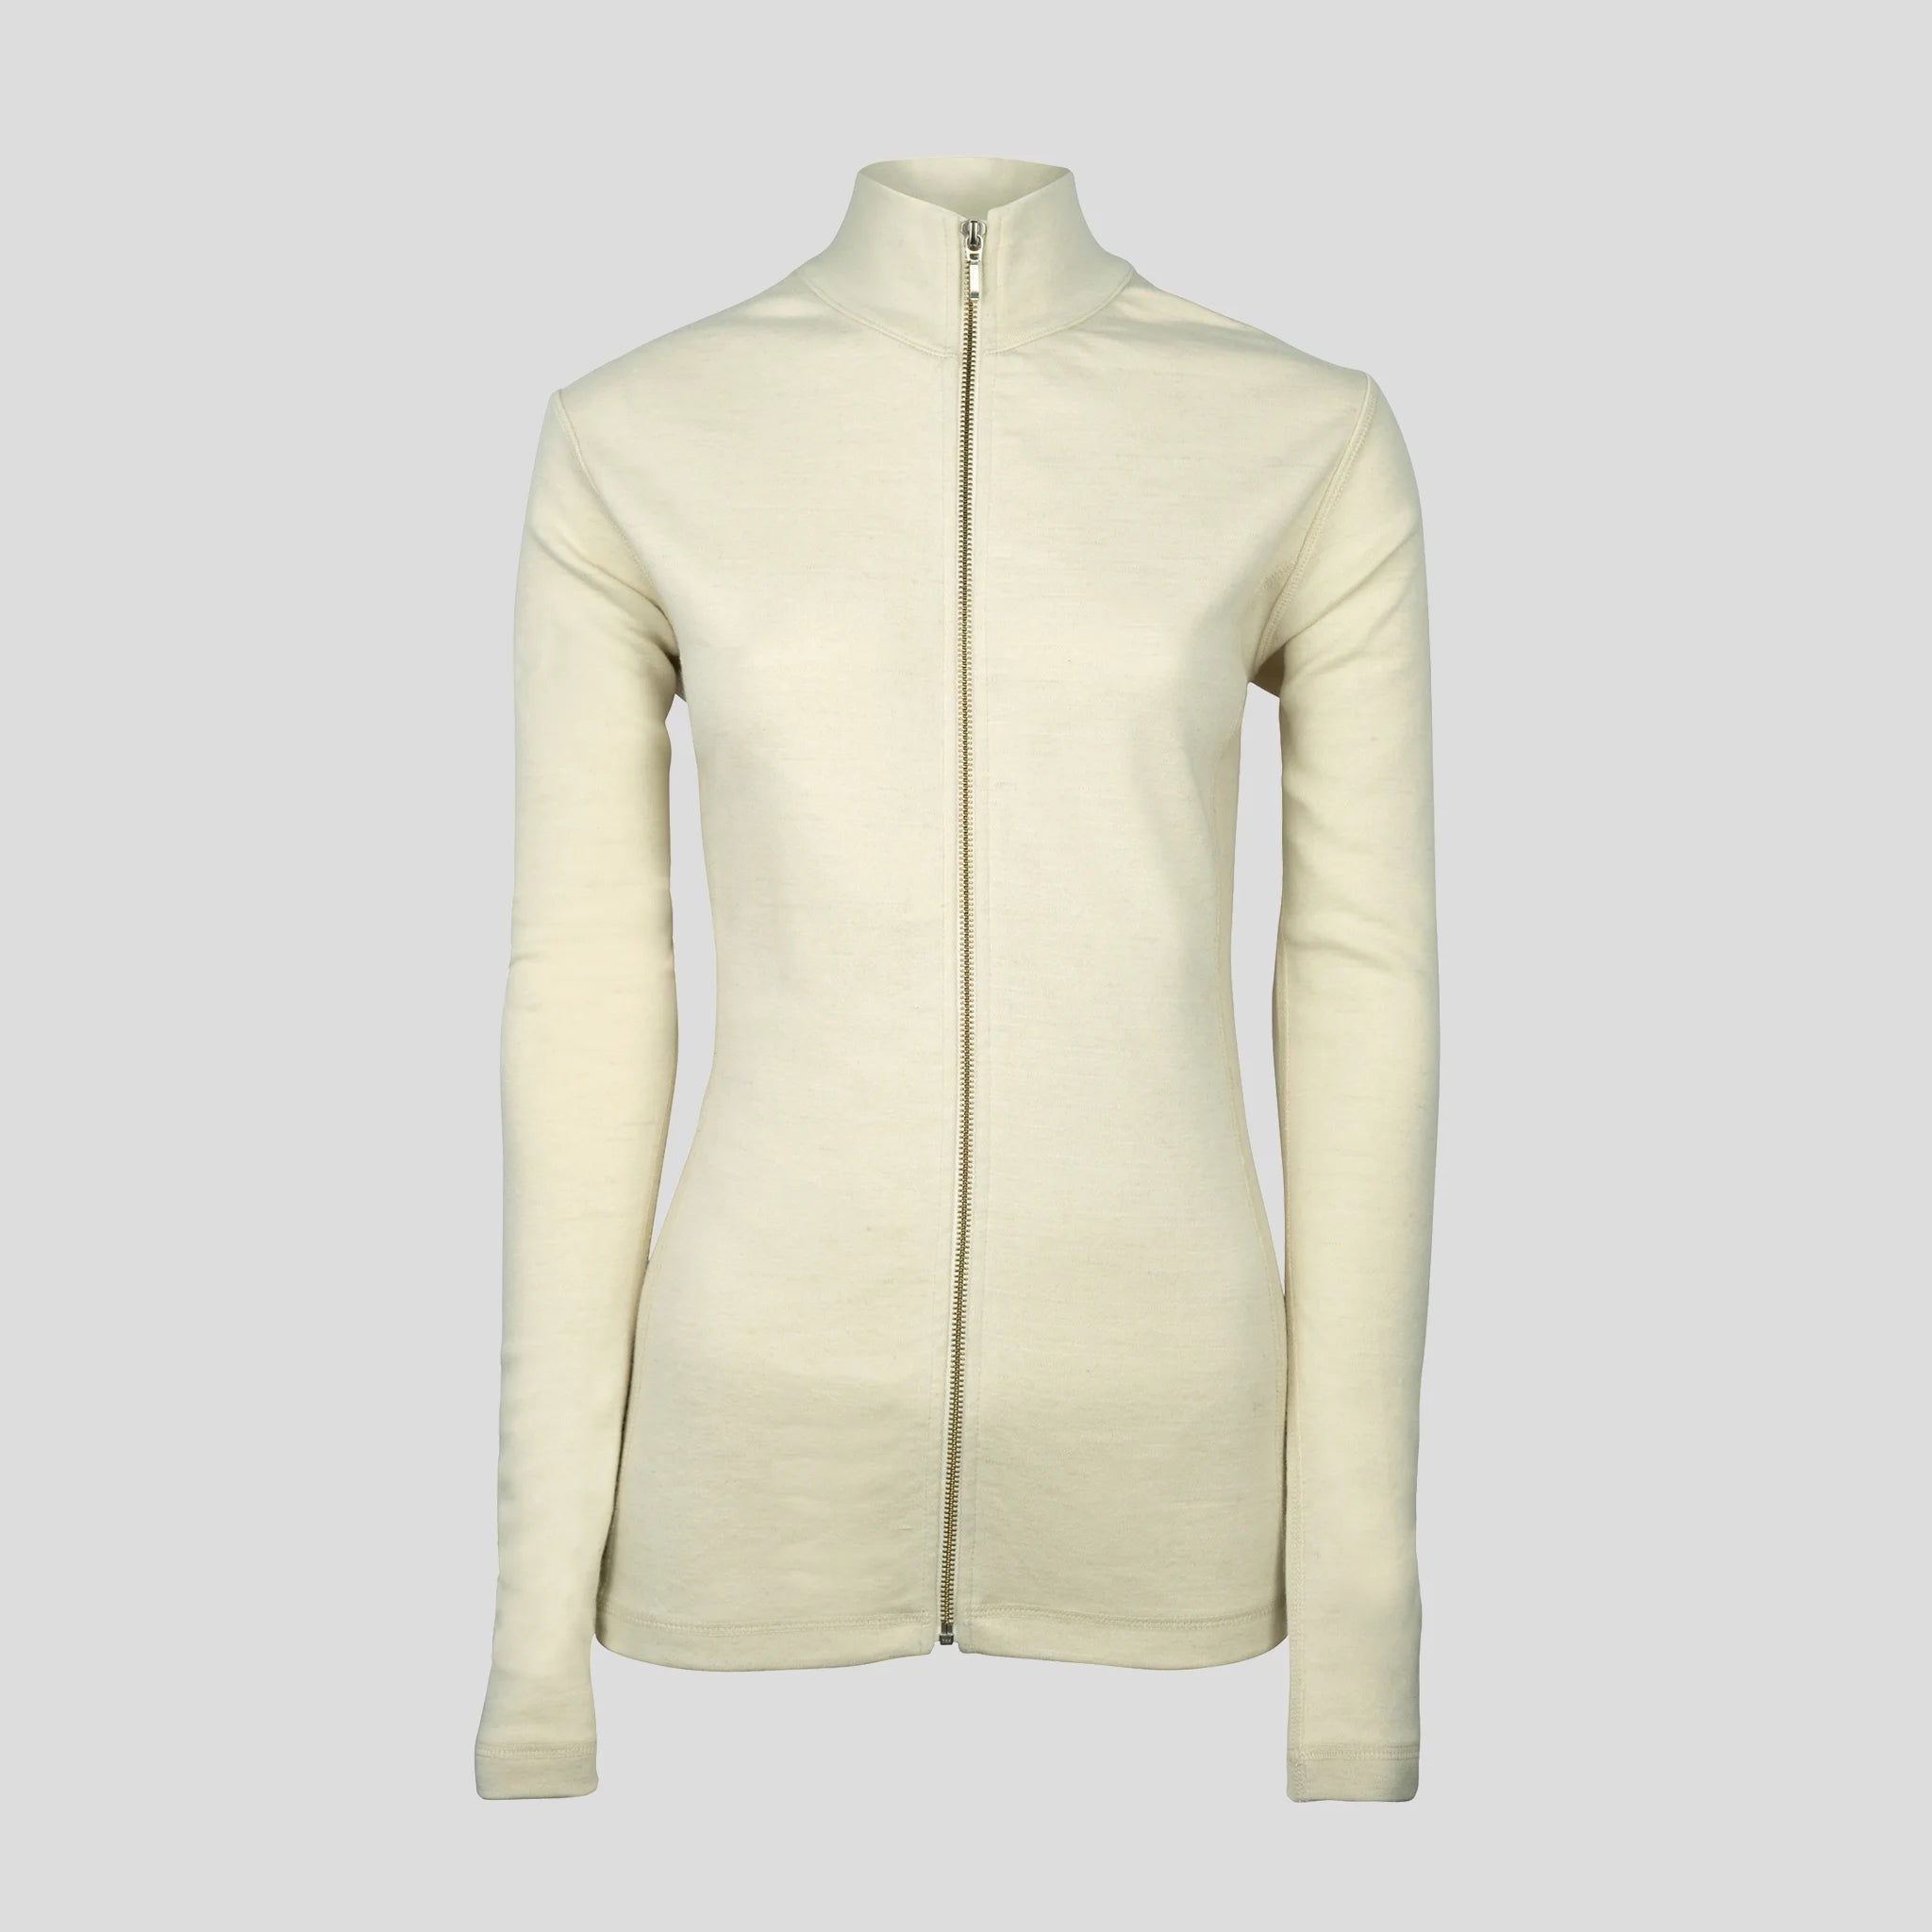 women sustainable alpaca wool jacket full zip midweight color natural white